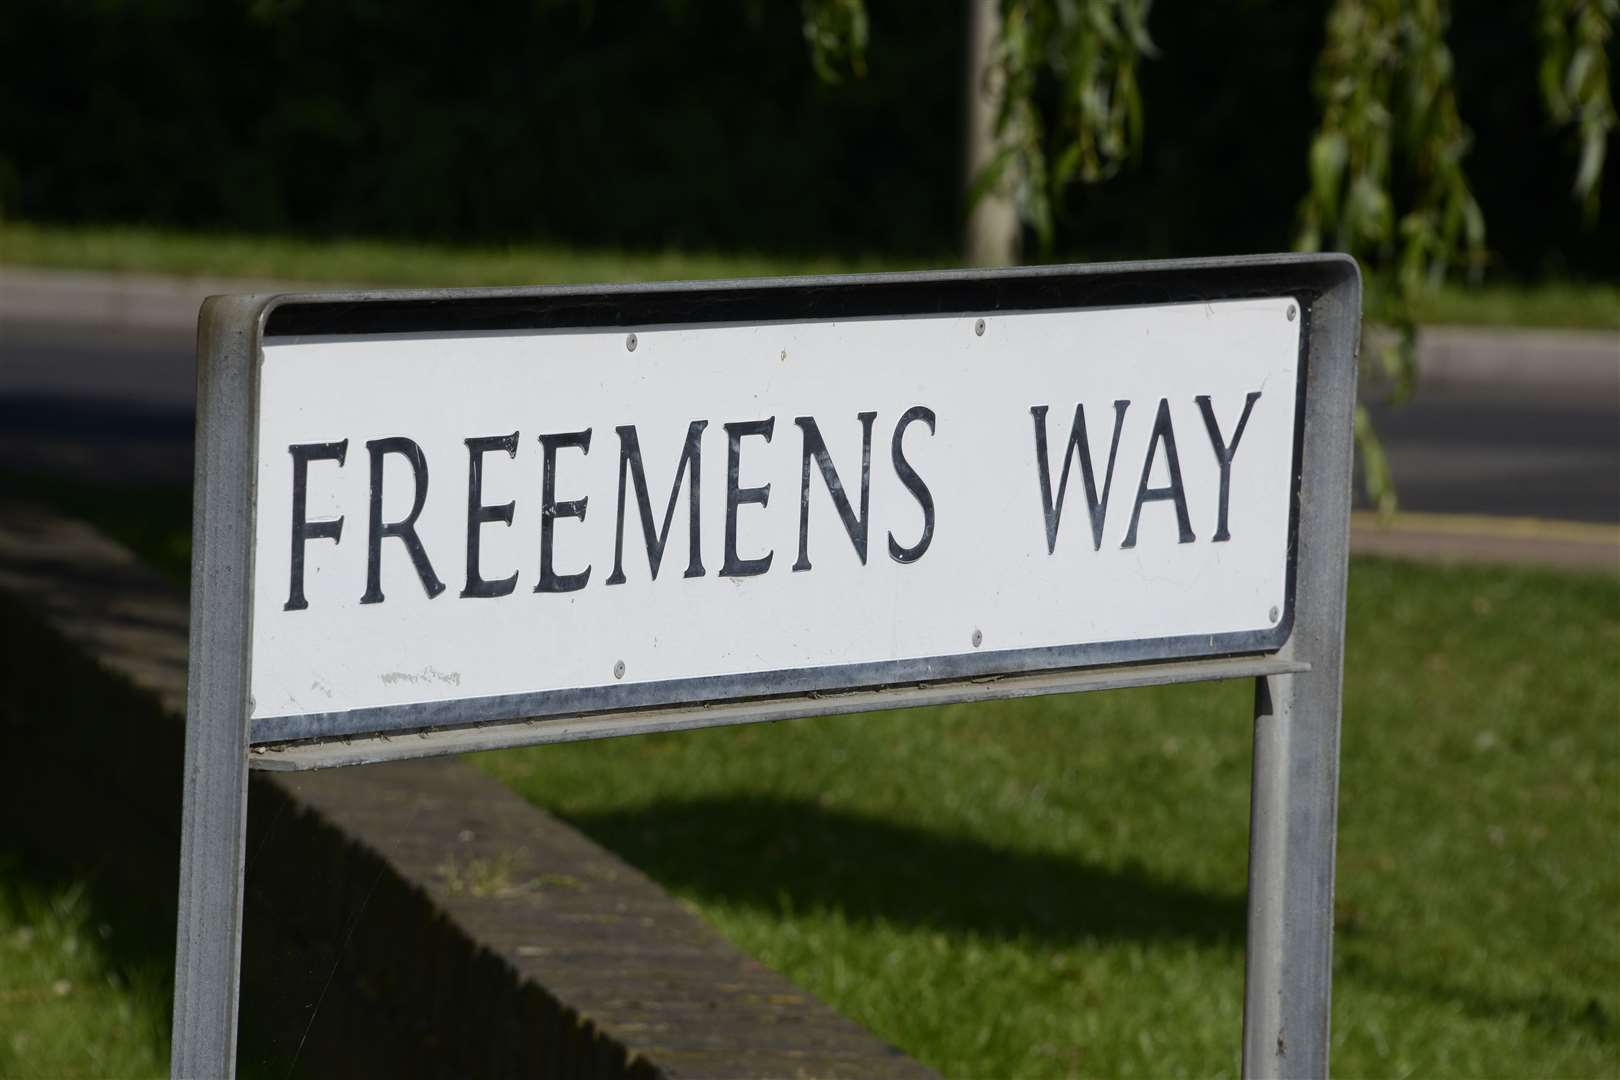 Police were called to a disturbance in Freemens Way, Deal Picture: Paul Amos